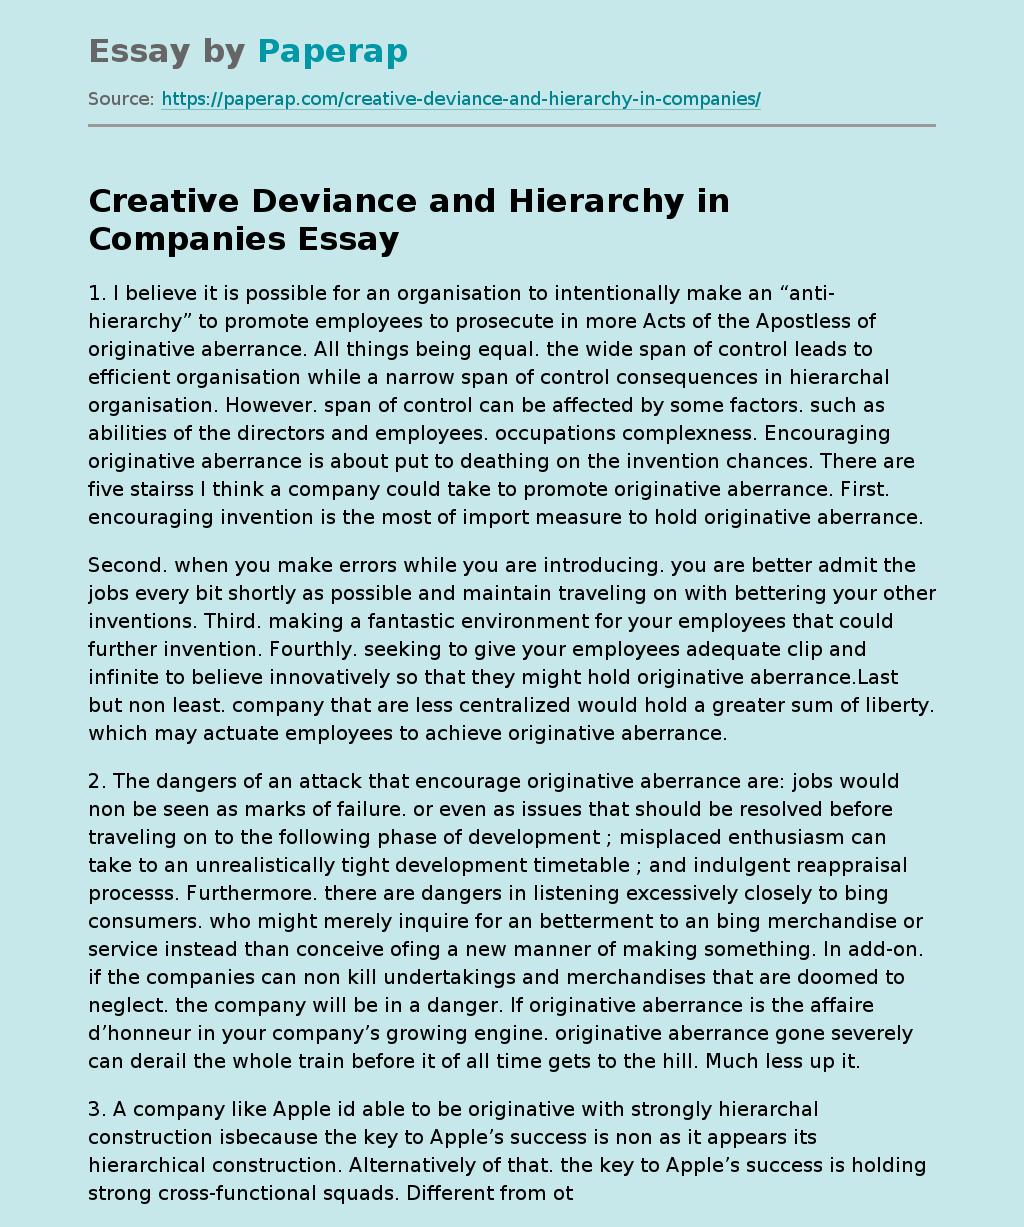 Creative Deviance and Hierarchy in Companies